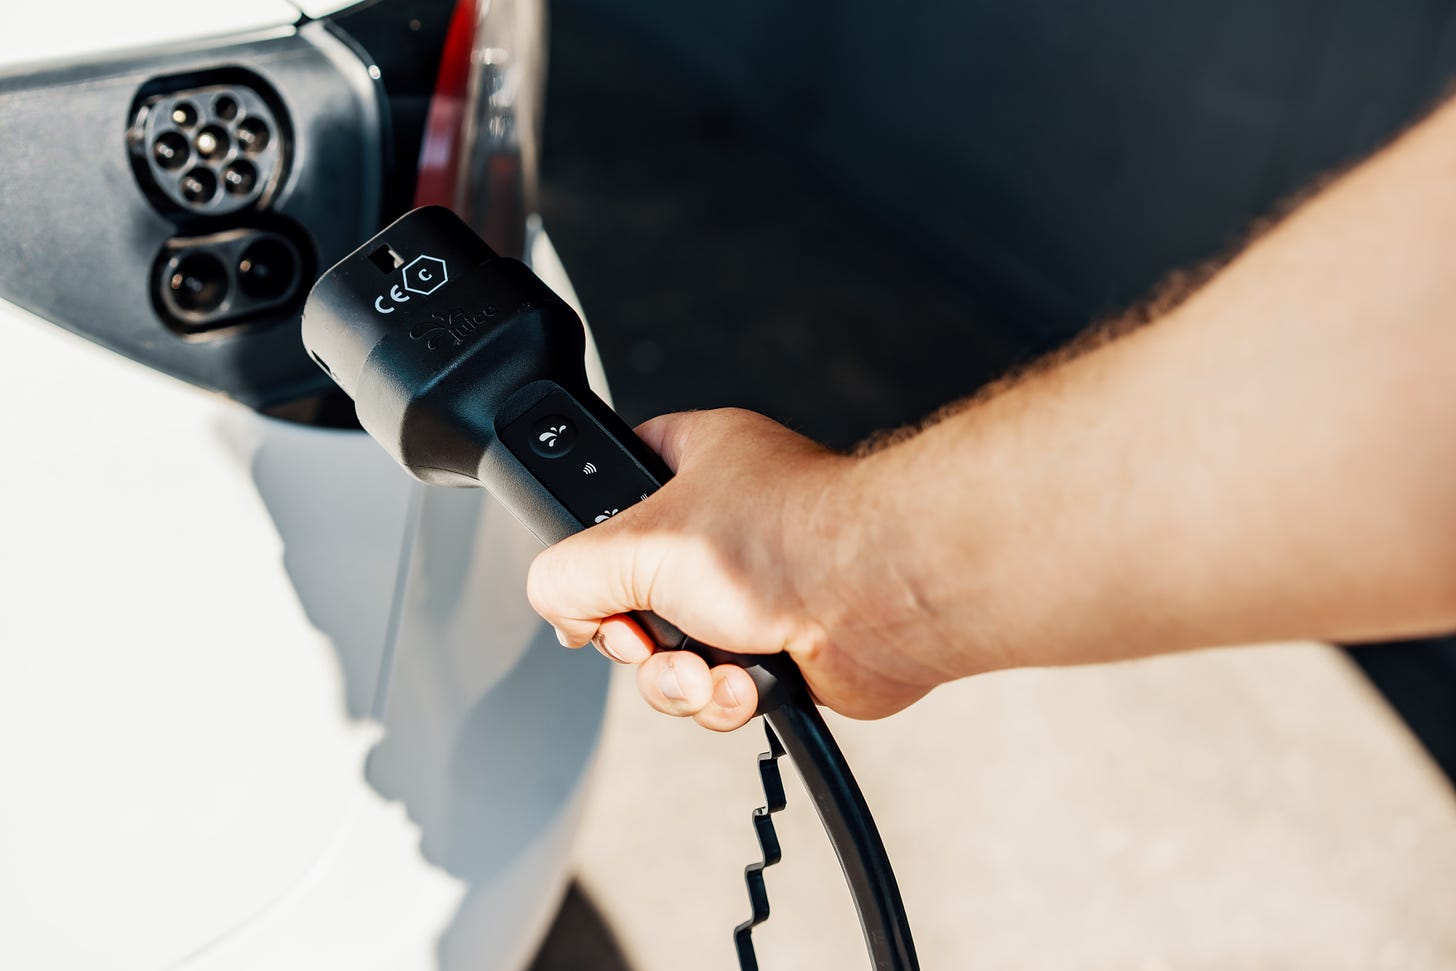 An arm holds an electric vehicle charging cable up to a car.